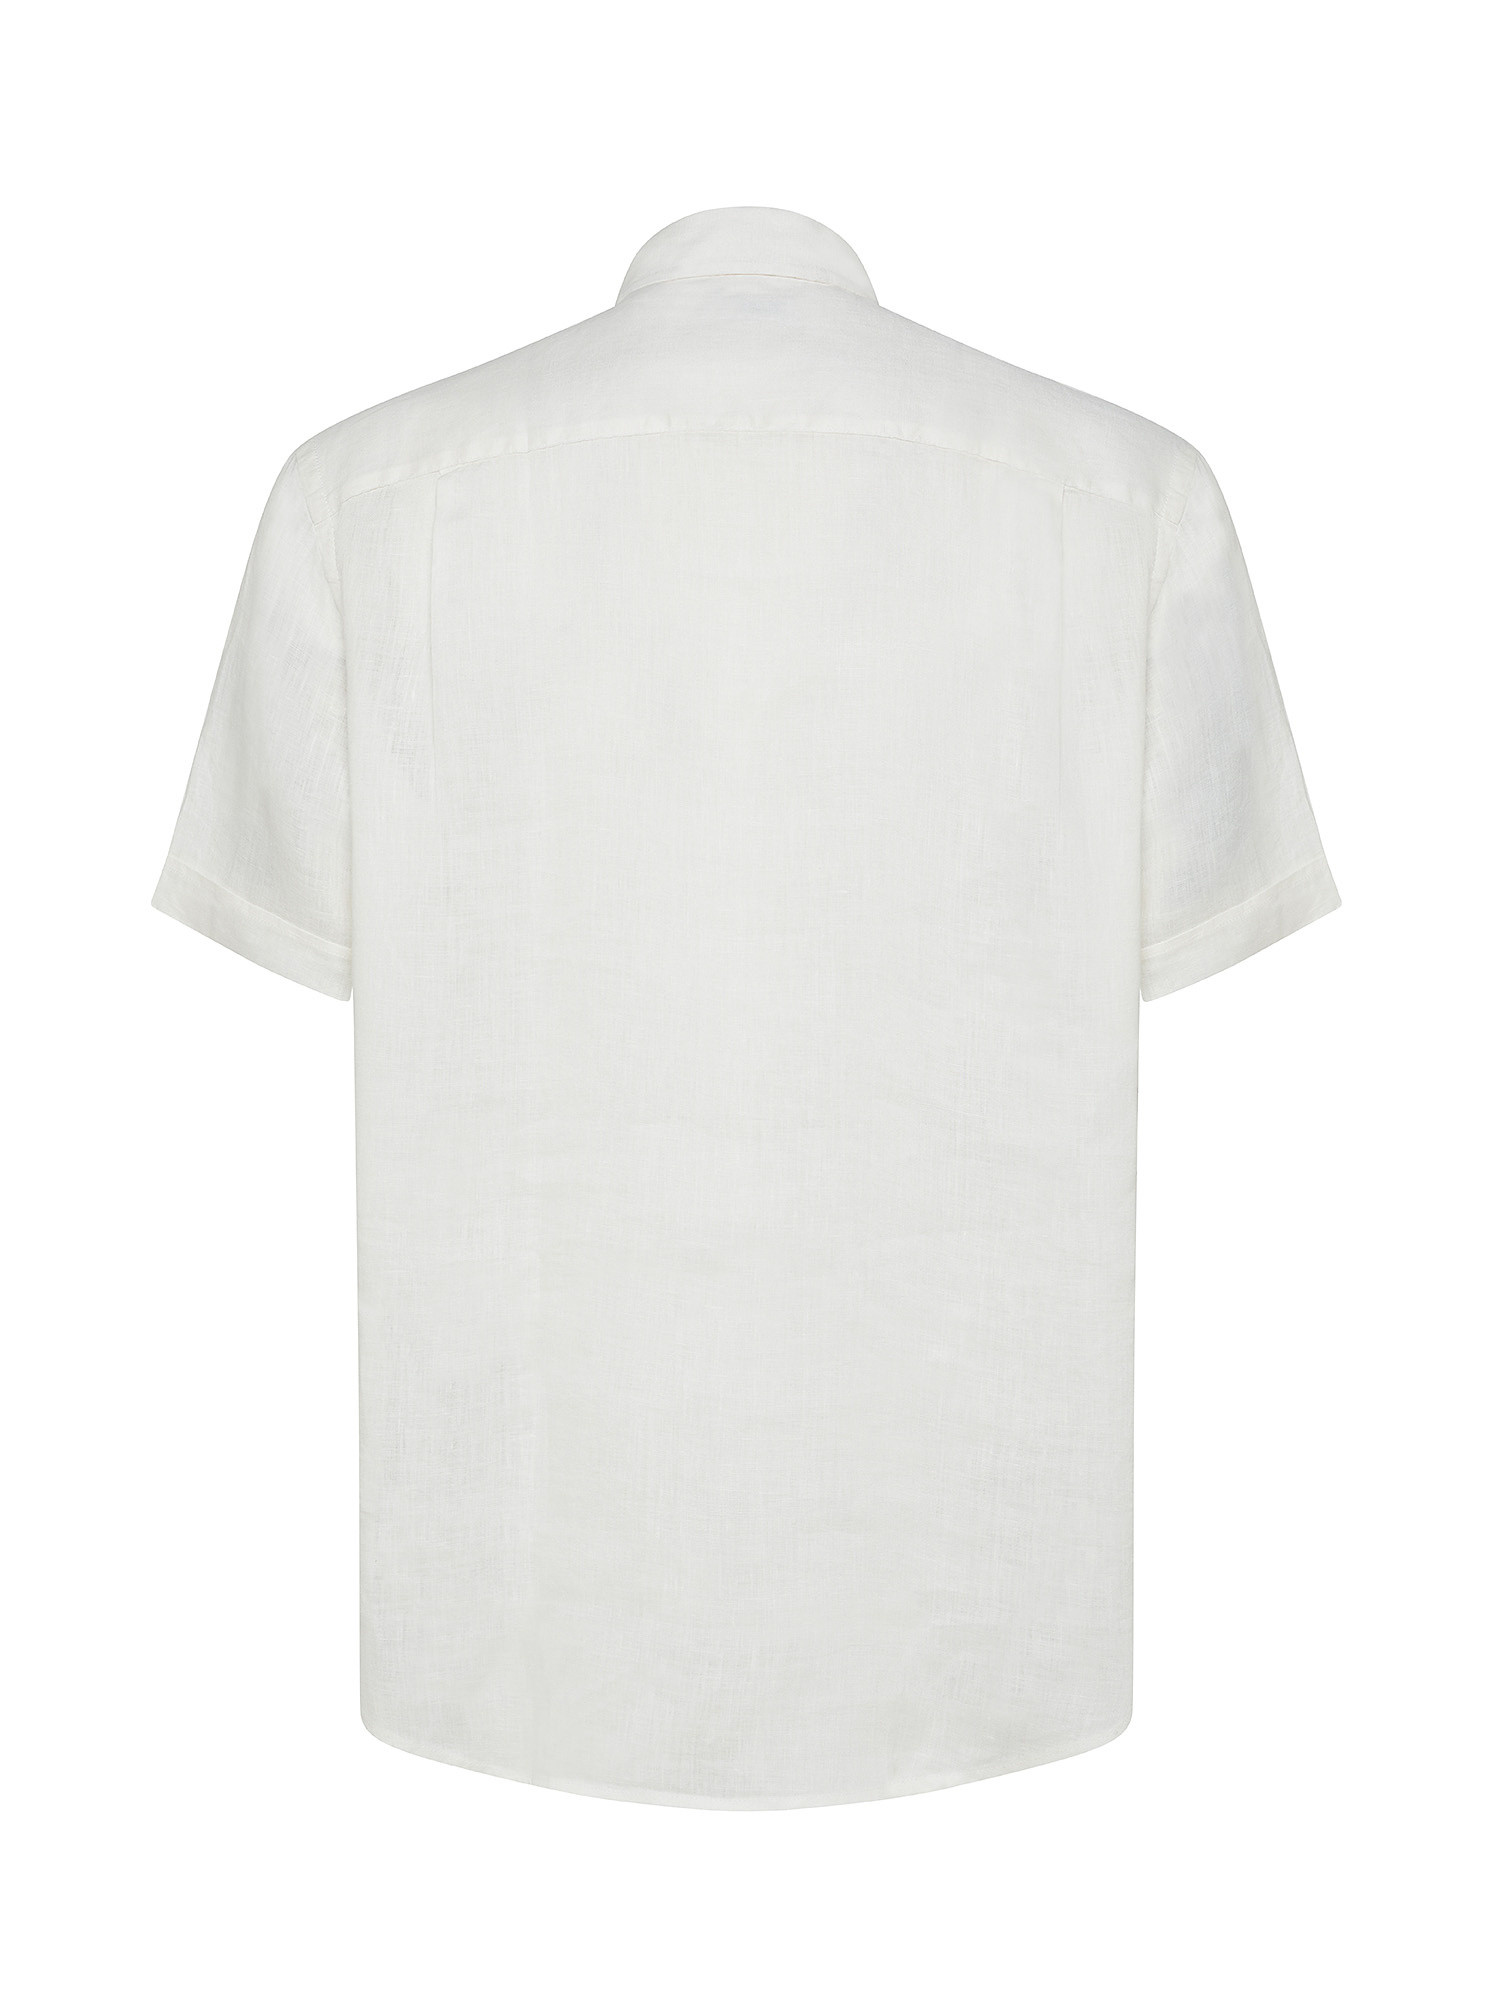 Luca D'Altieri - Regular fit shirt in pure linen, White, large image number 1